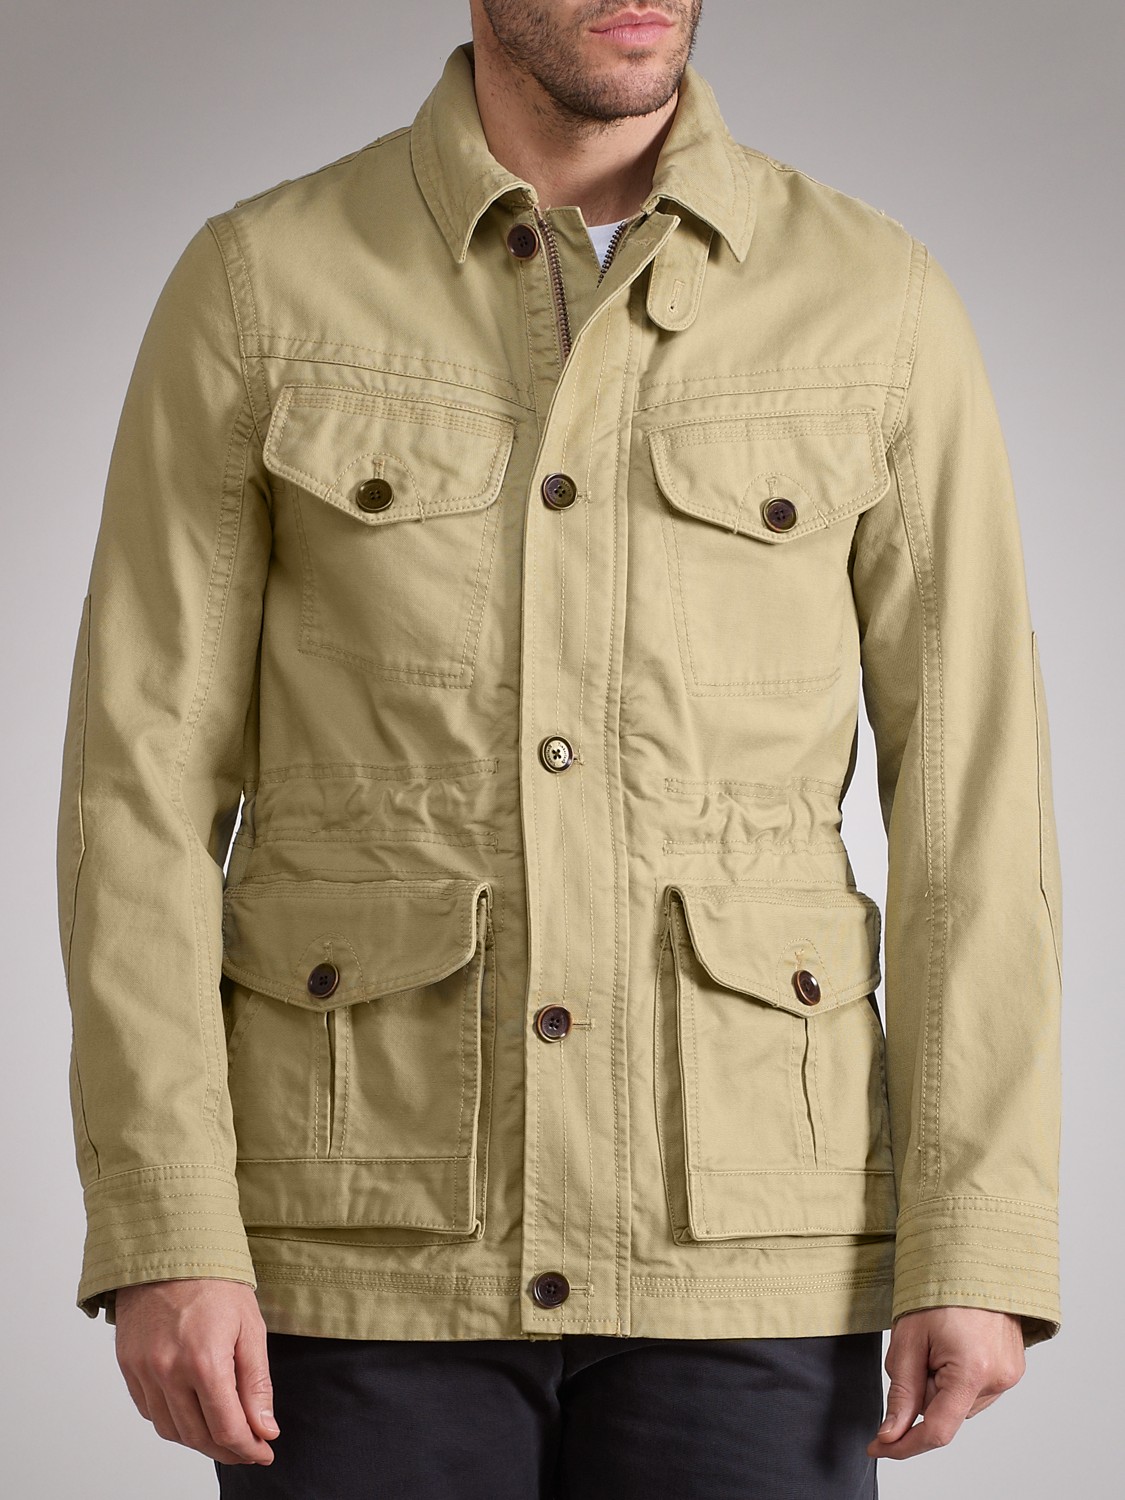 Lyst - Timberland Earthkeepers Abington Canvas Parka Jacket in Natural ...